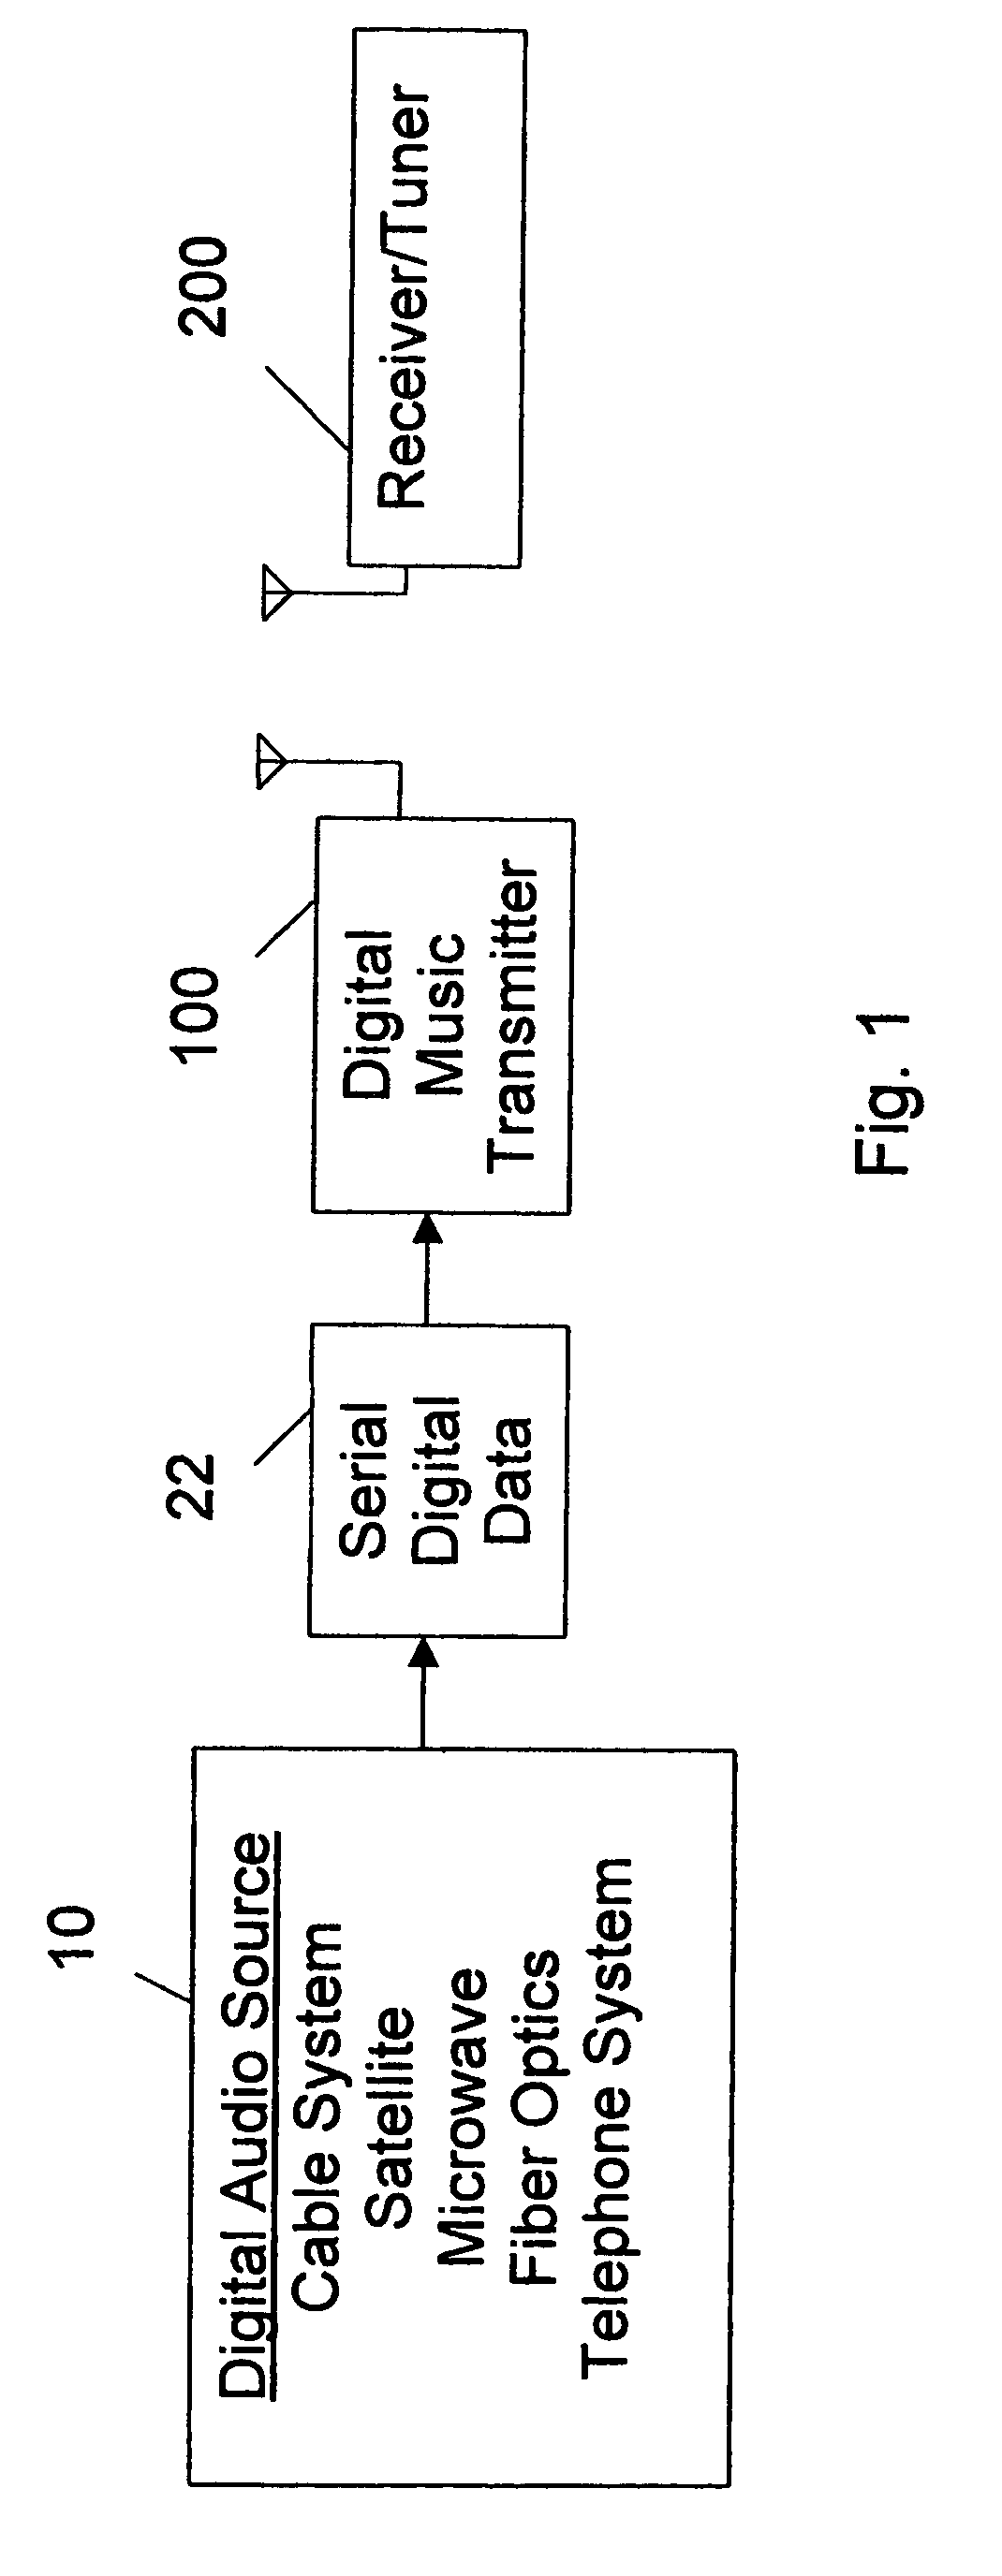 Wireless environment method and apparatus